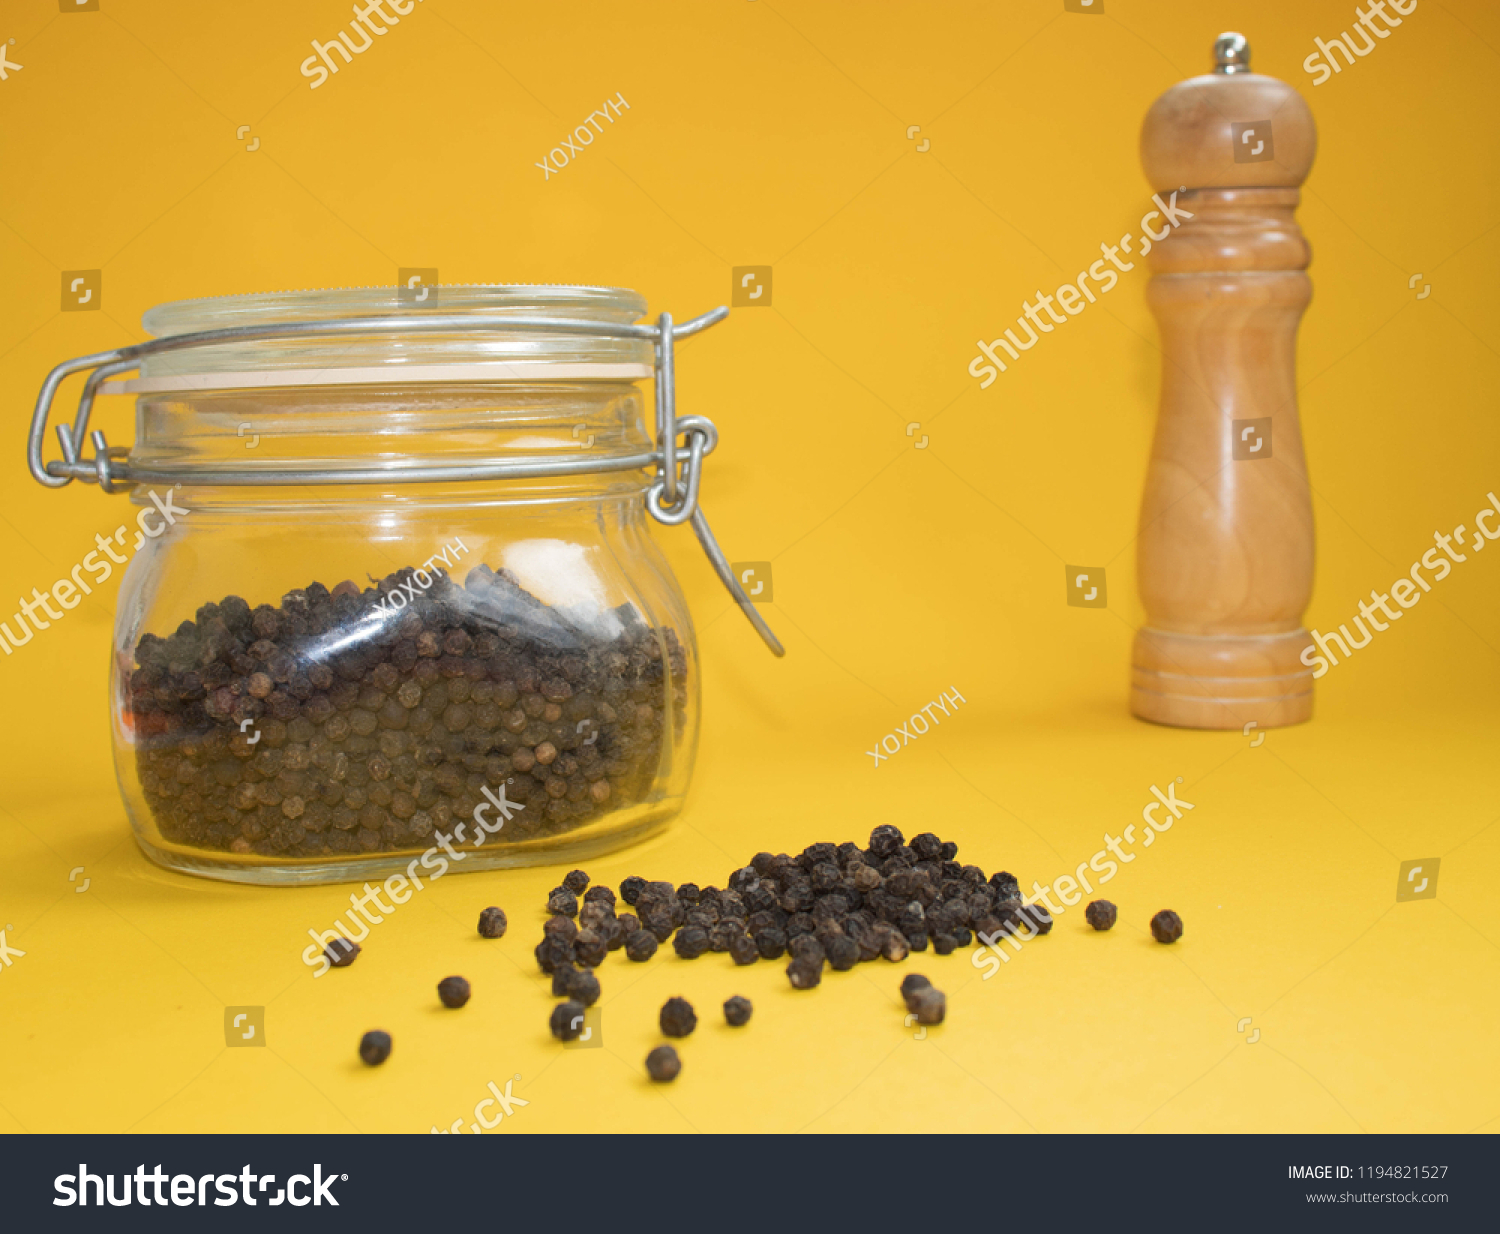 Black Pepper On Yellow Background Pepper Stock Photo Edit Now 1194821527